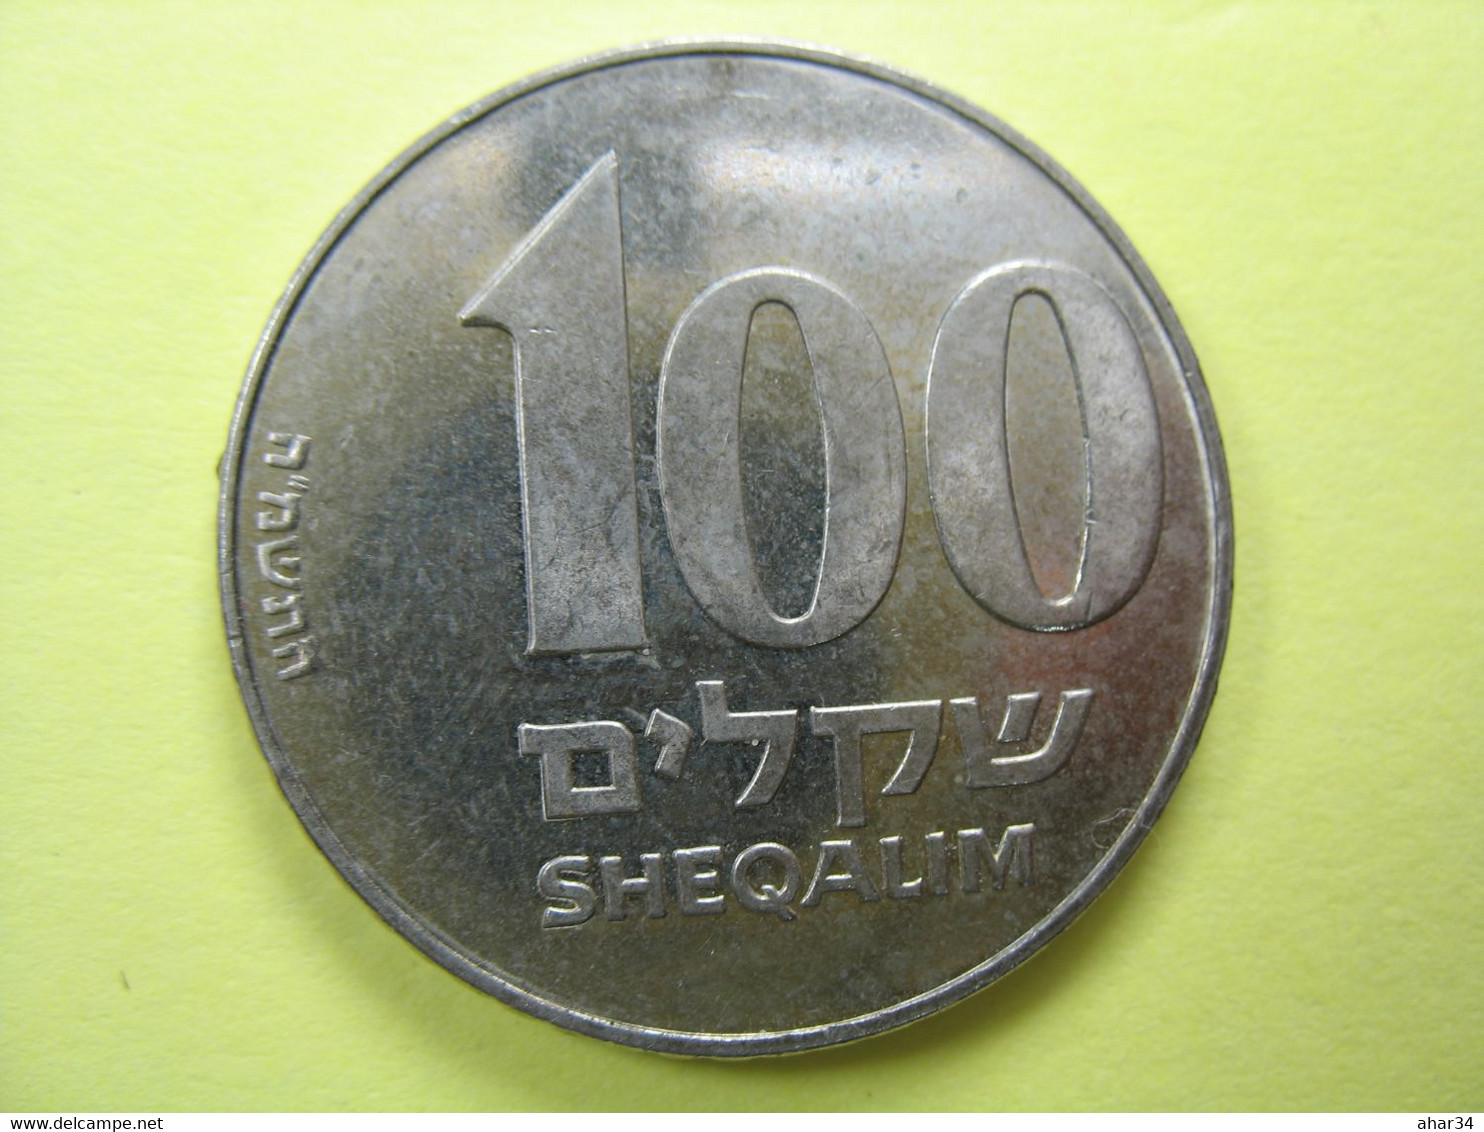 TEMPLATE LISTING ISRAEL  LOT OF  10 COINS 100 SHEQALIM 1985 JABOTINSKY  UNC COIN. - Otros – Asia